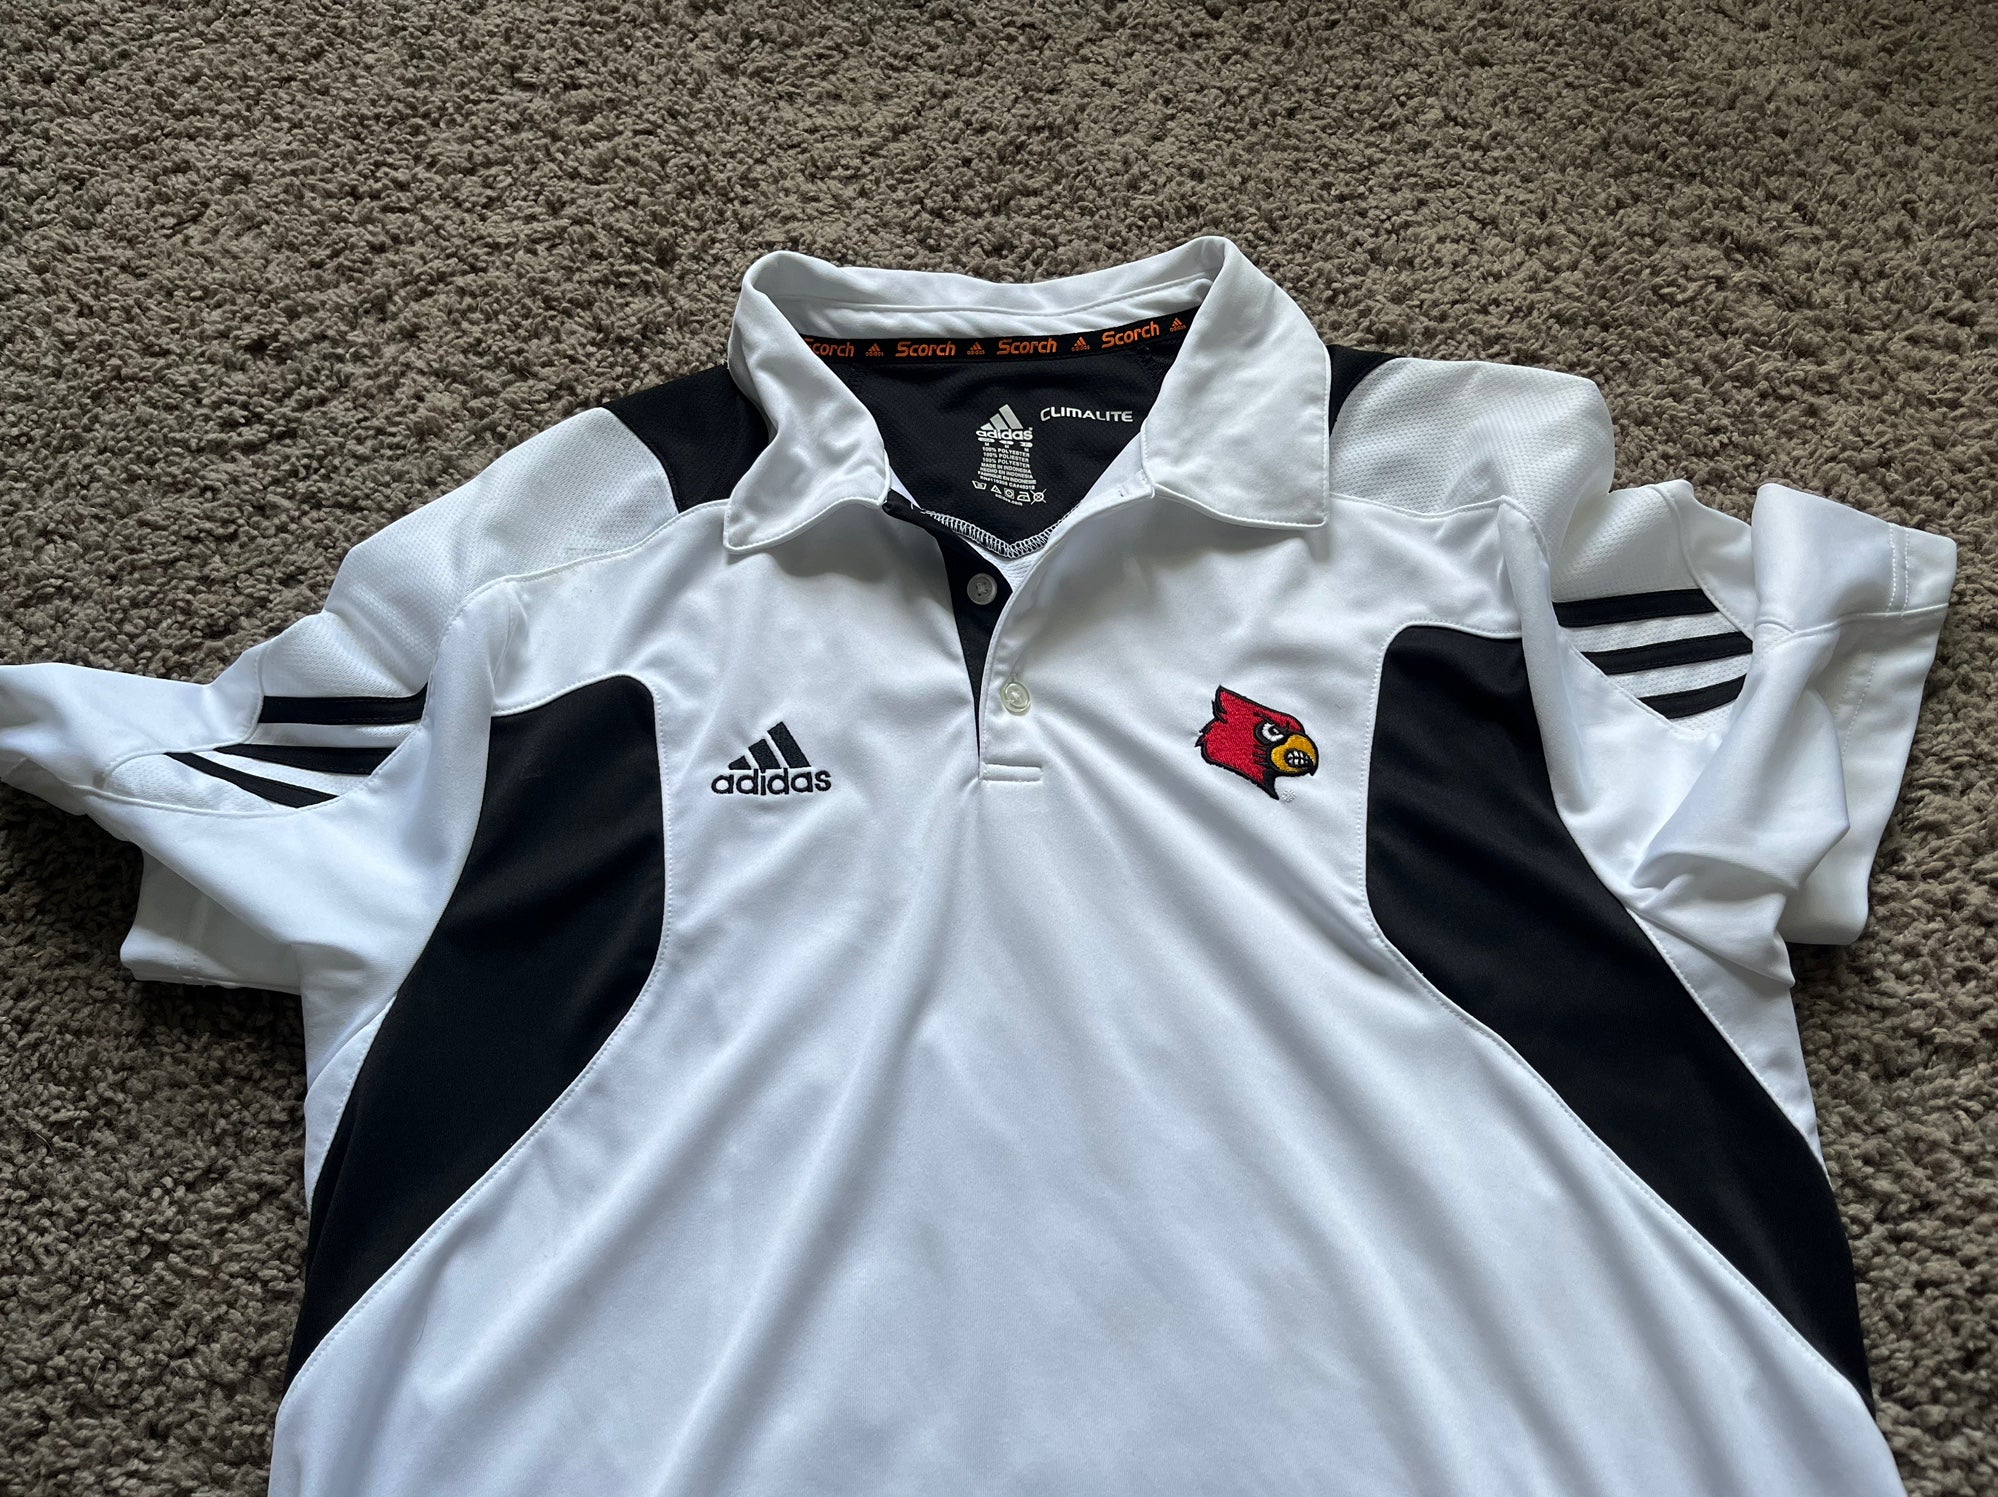 Louisville Cardinals adidas Climalite Polo Men's Red Used